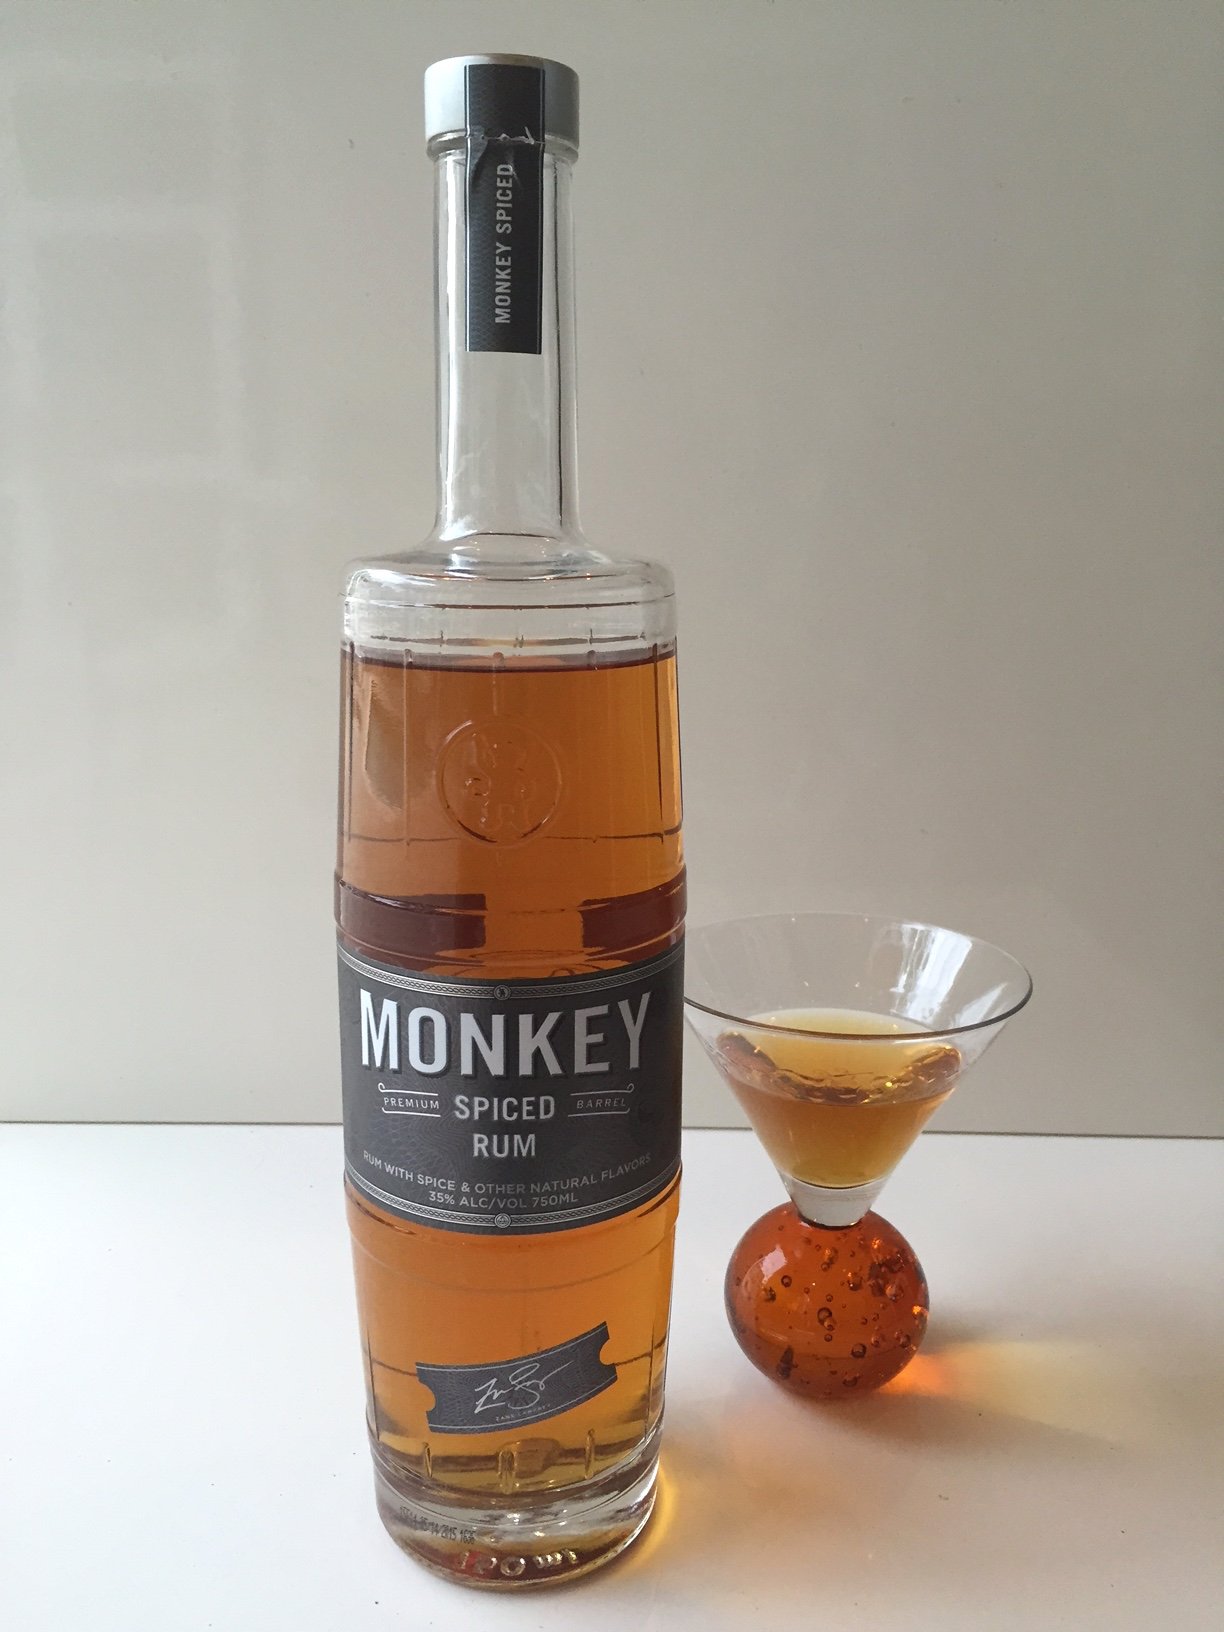 Nuts for Monkey Rum! â¢ the Cocktail Couple